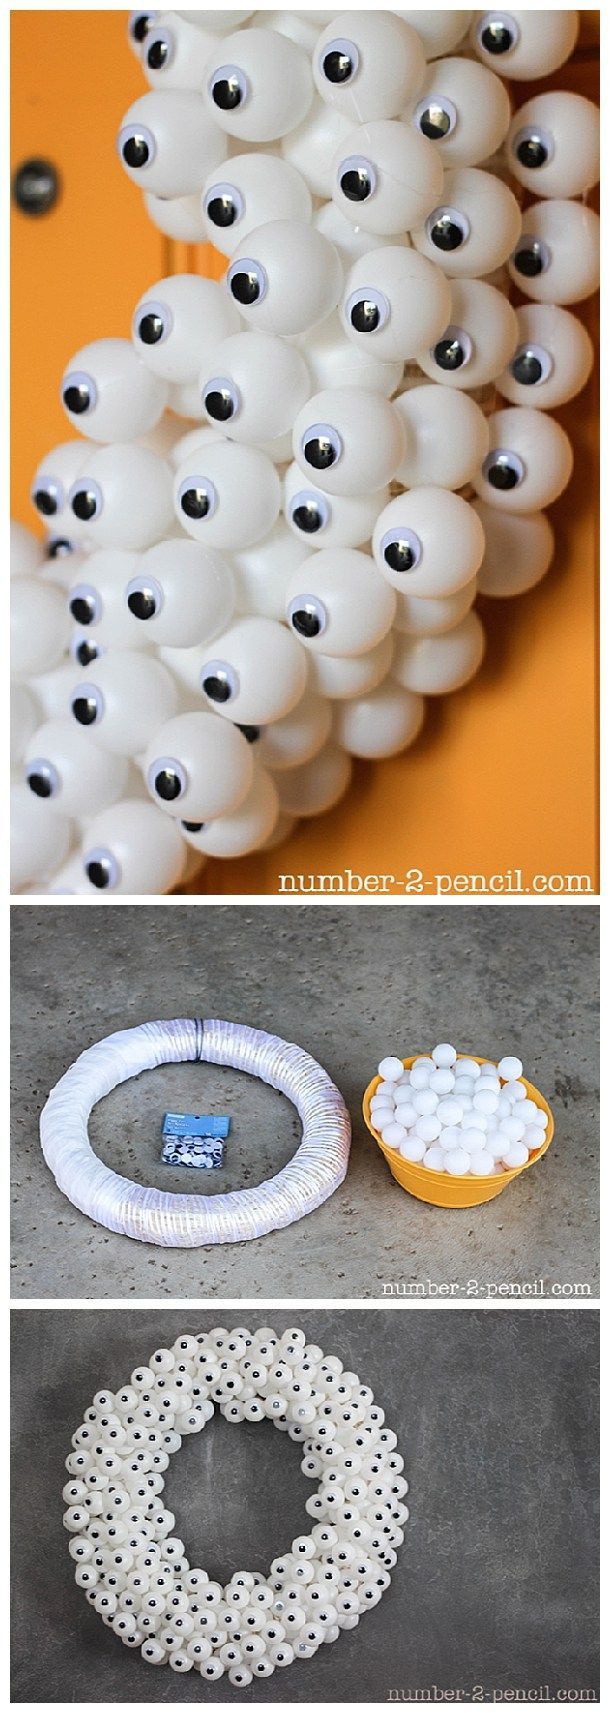 DIY Googly Eyes PIng Pong Ball Halloween Wreath Tutorial | No. 2 Pencil – Spooktacular Halloween DIYs, Crafts and Projects – The